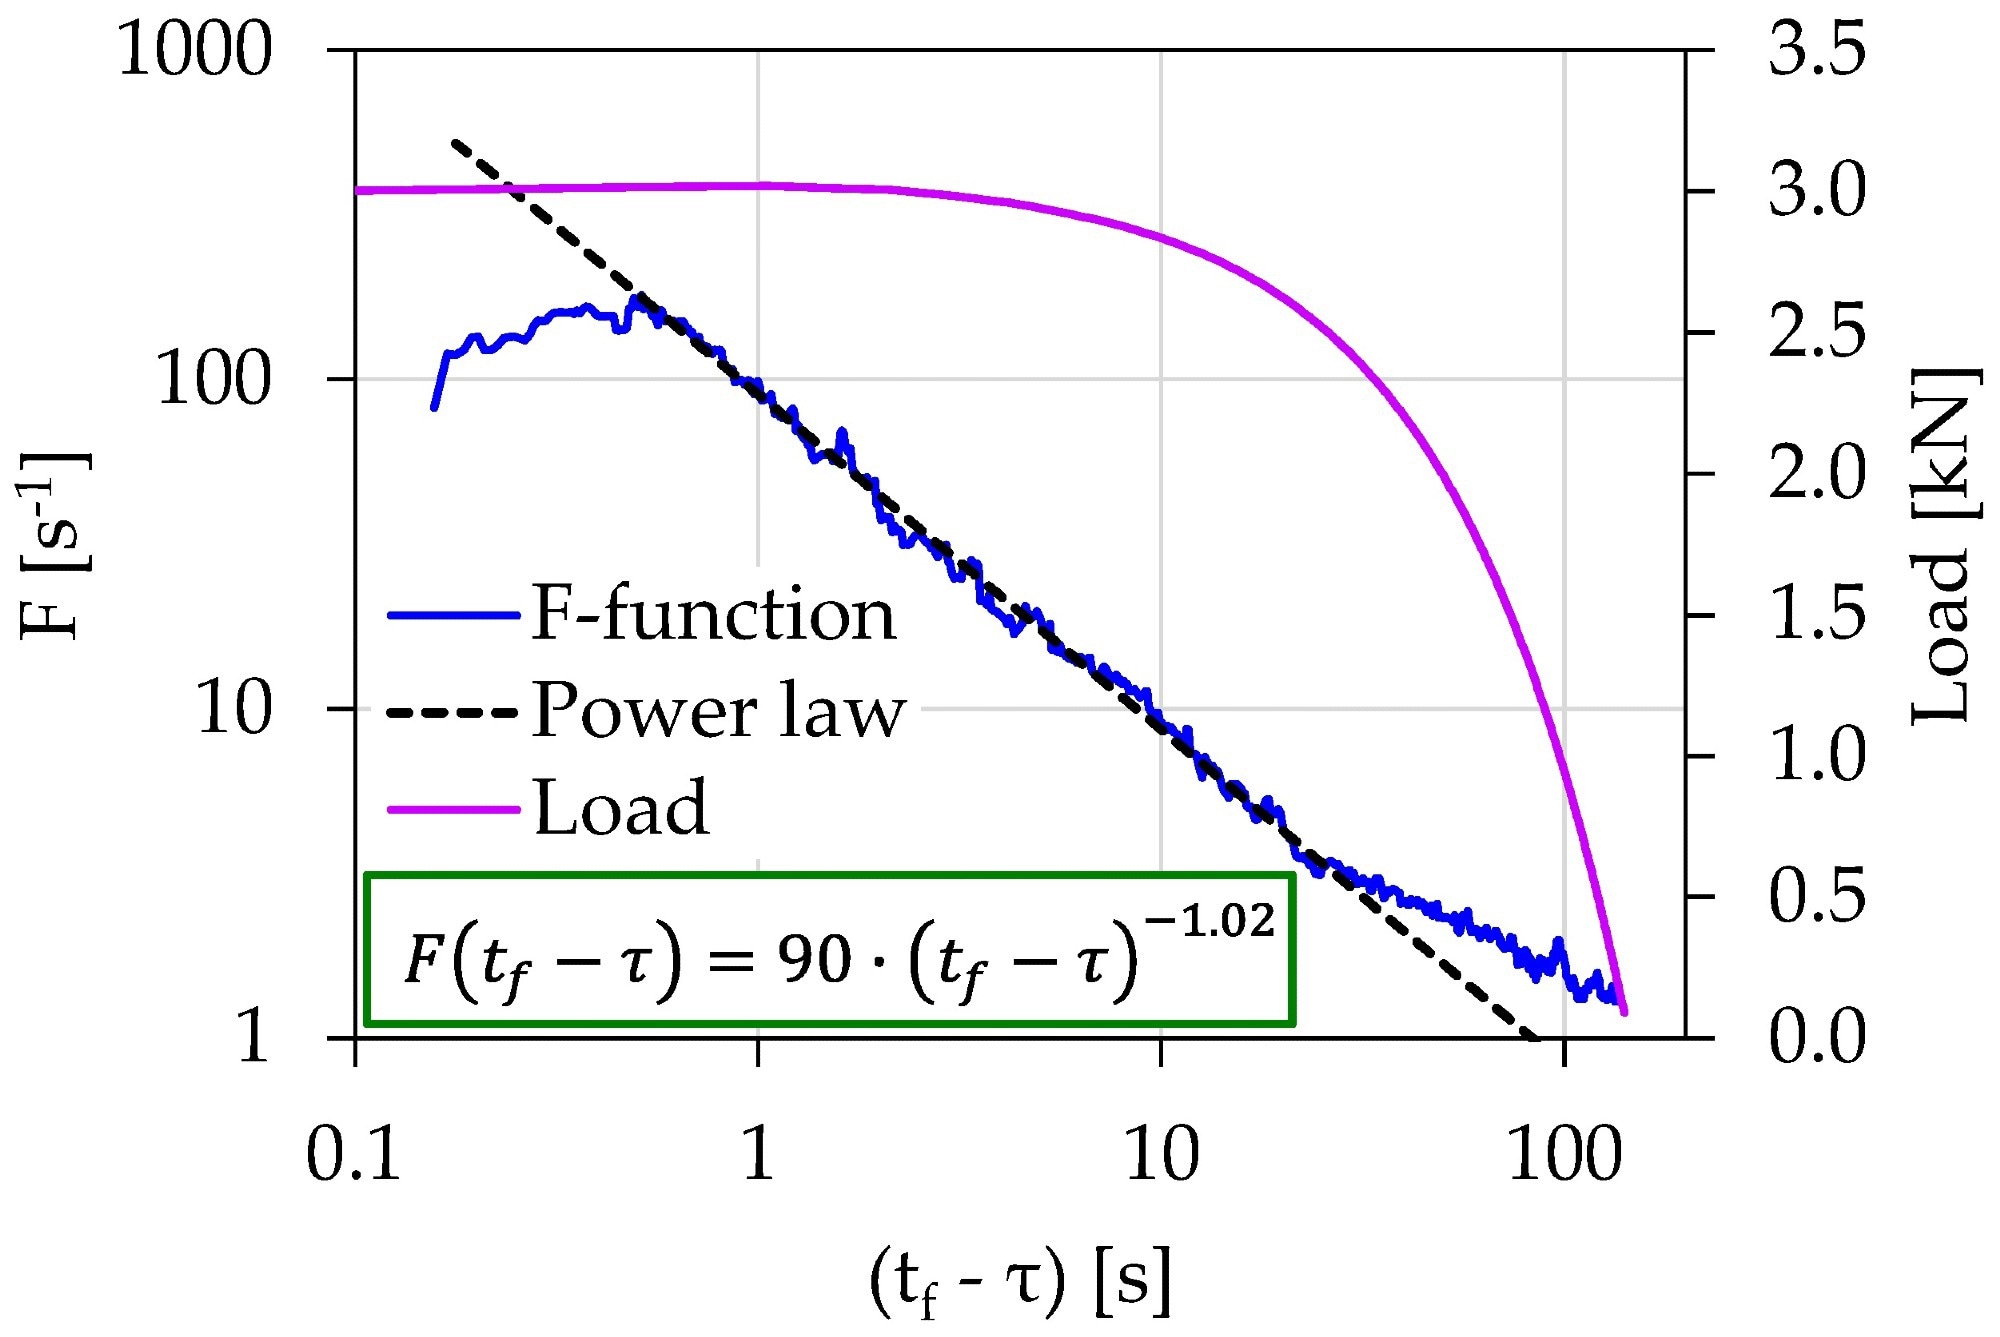 The temporal evolution of the F-function in juxtaposition to the load applied for the experiment Exp-LR1 in terms of the “time-to-failure” parameter.